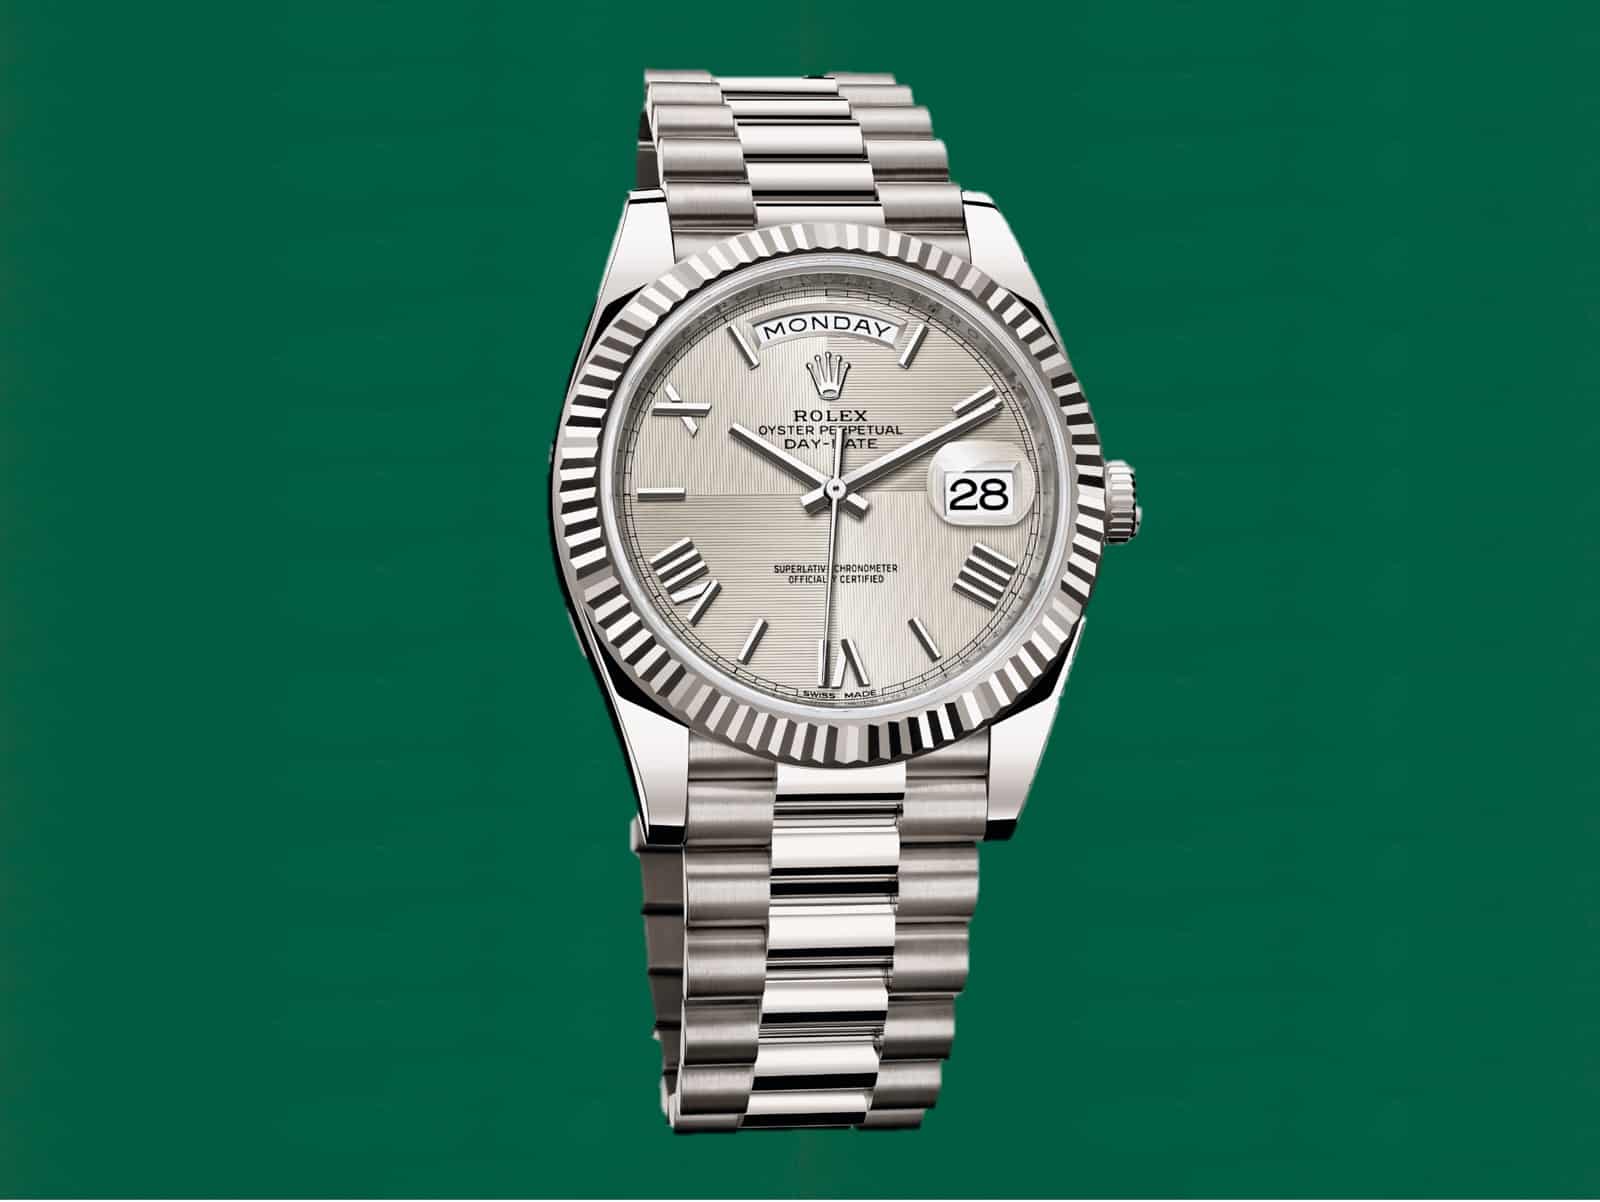 Rolex Oyster Perpetual Day-Date 40 Kaliber 3255, Debut 2015